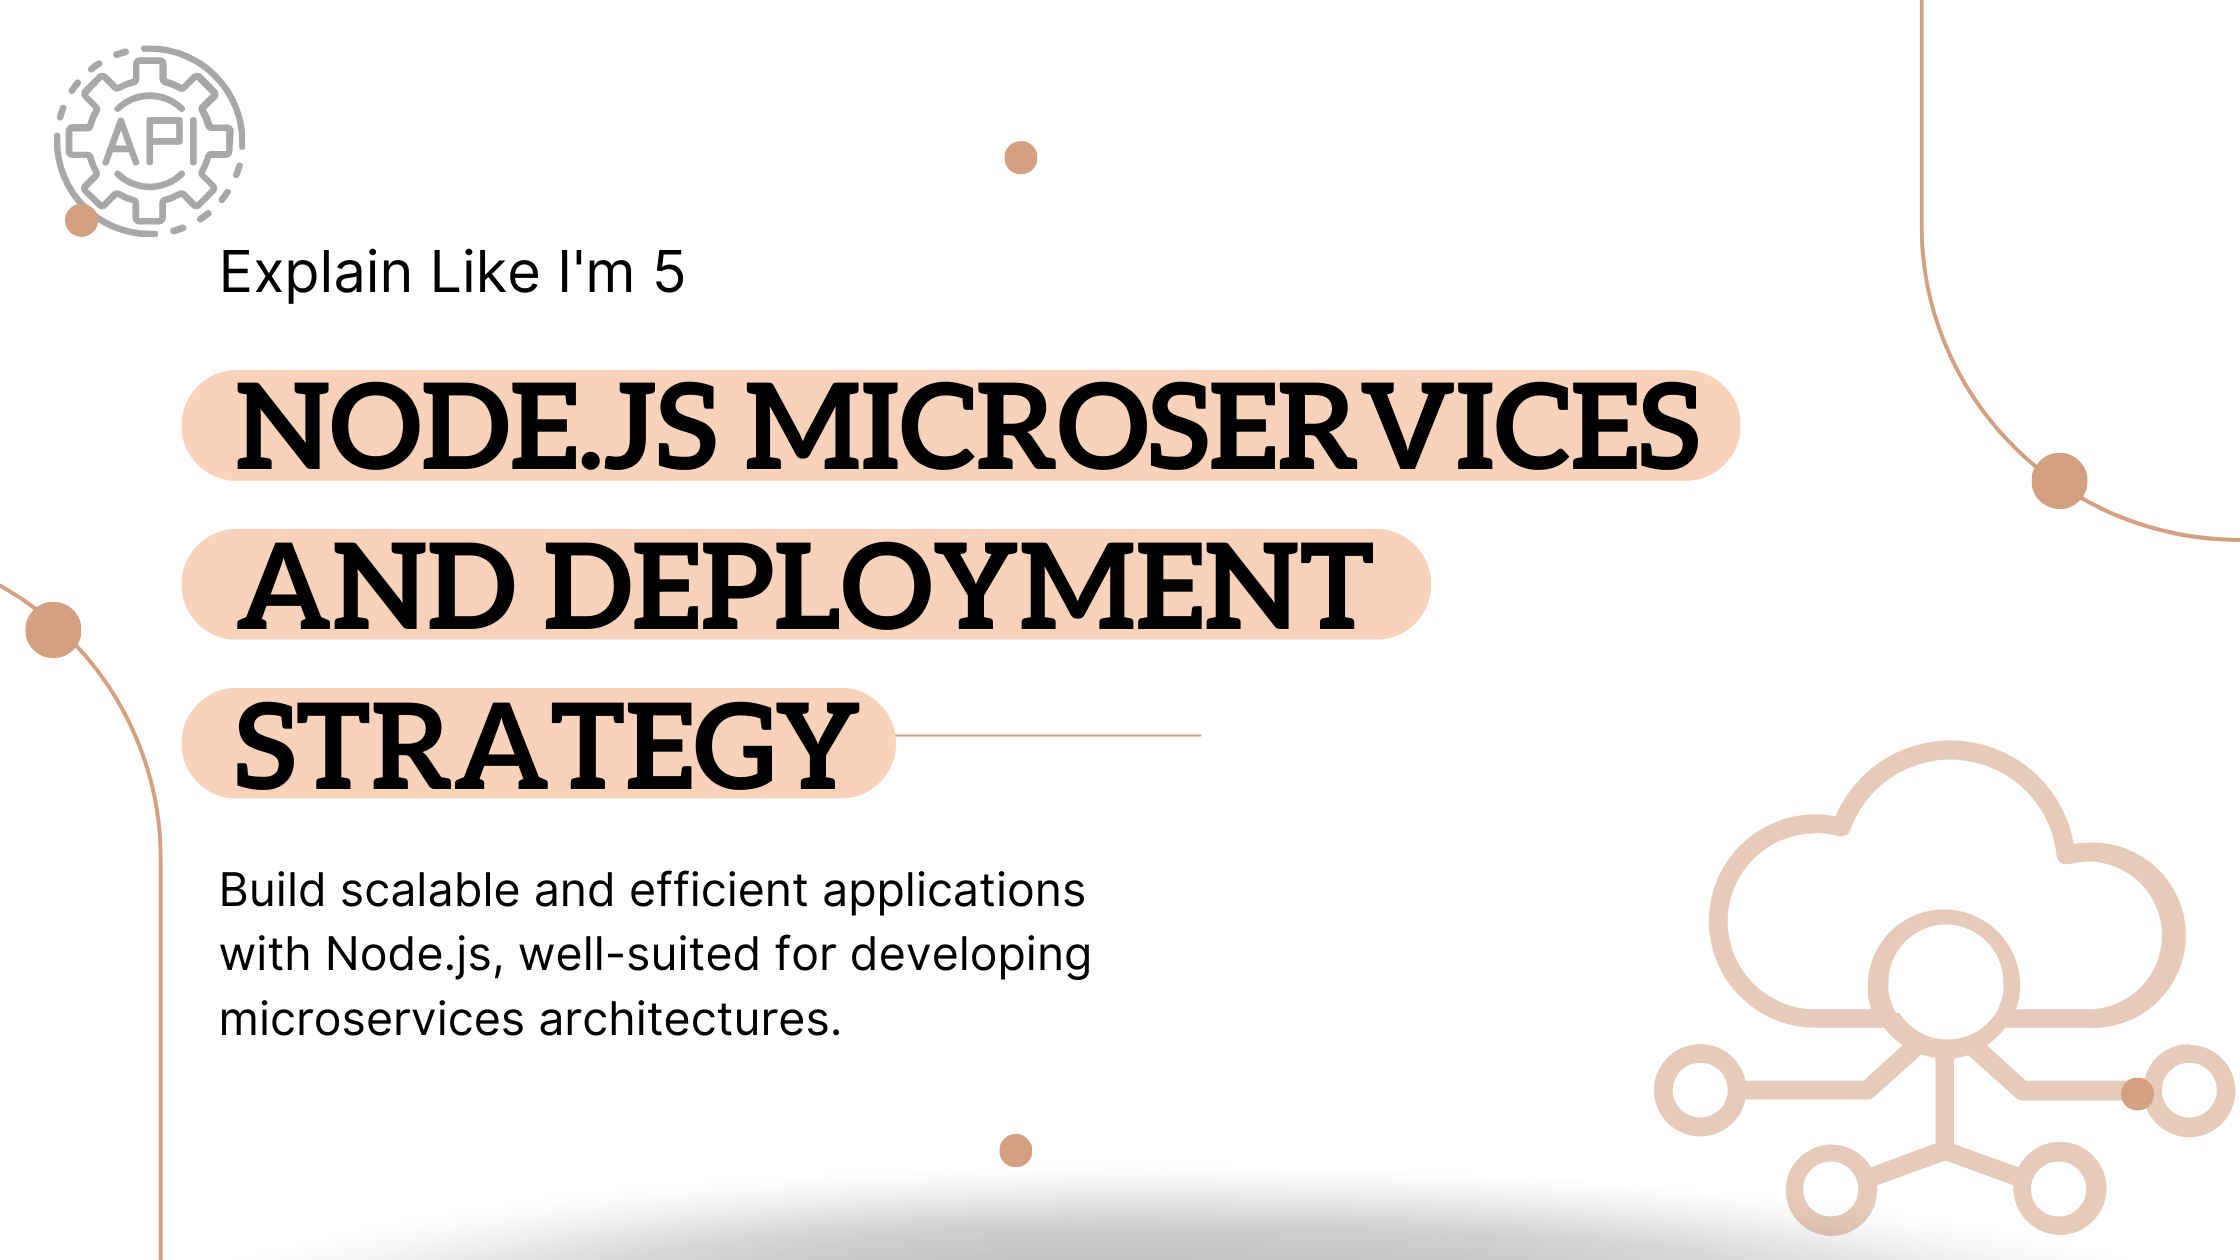 Explain Like I’m 5: Node.js Microservices and Deployment Strategy